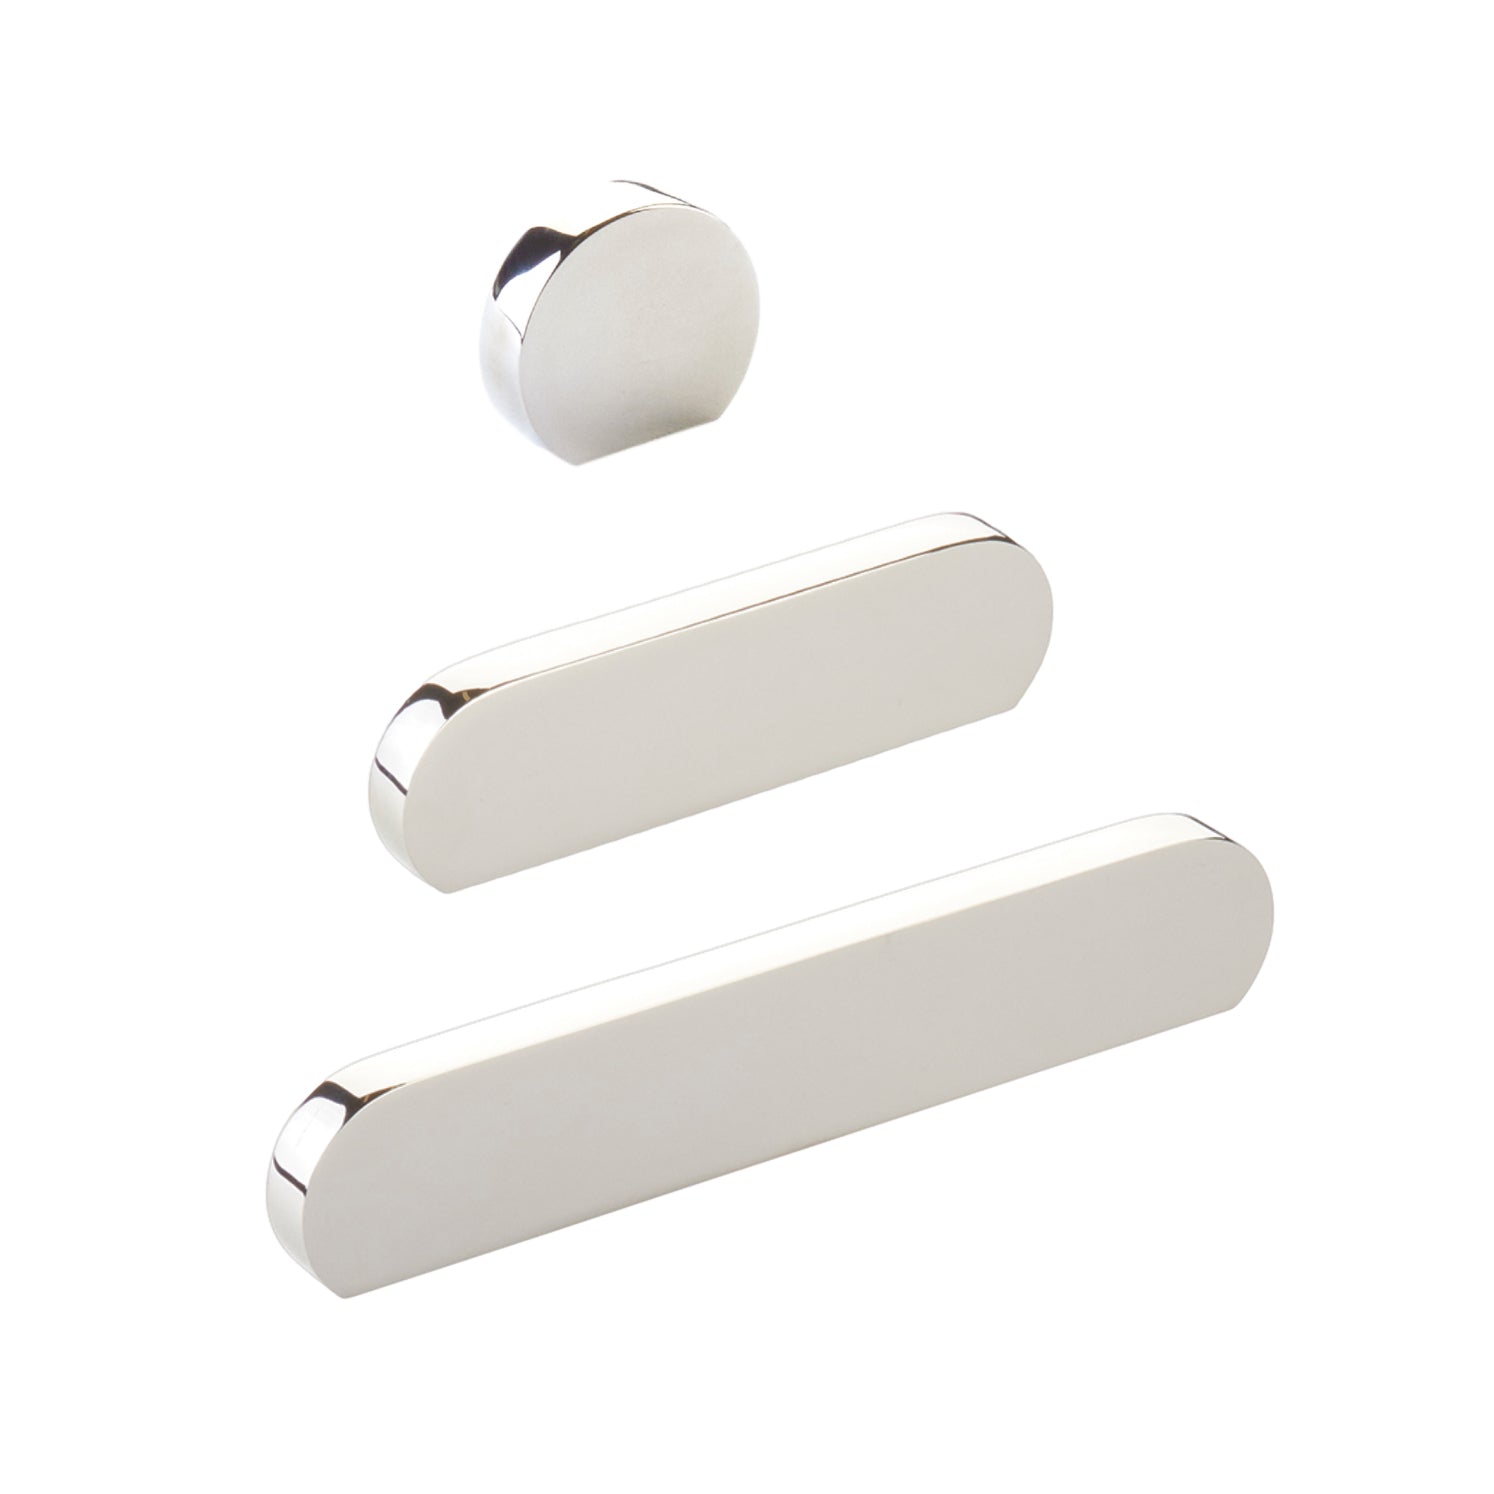 Polished Nickel "Bit" Rounded Drawer Pulls and Cabinet Knobs